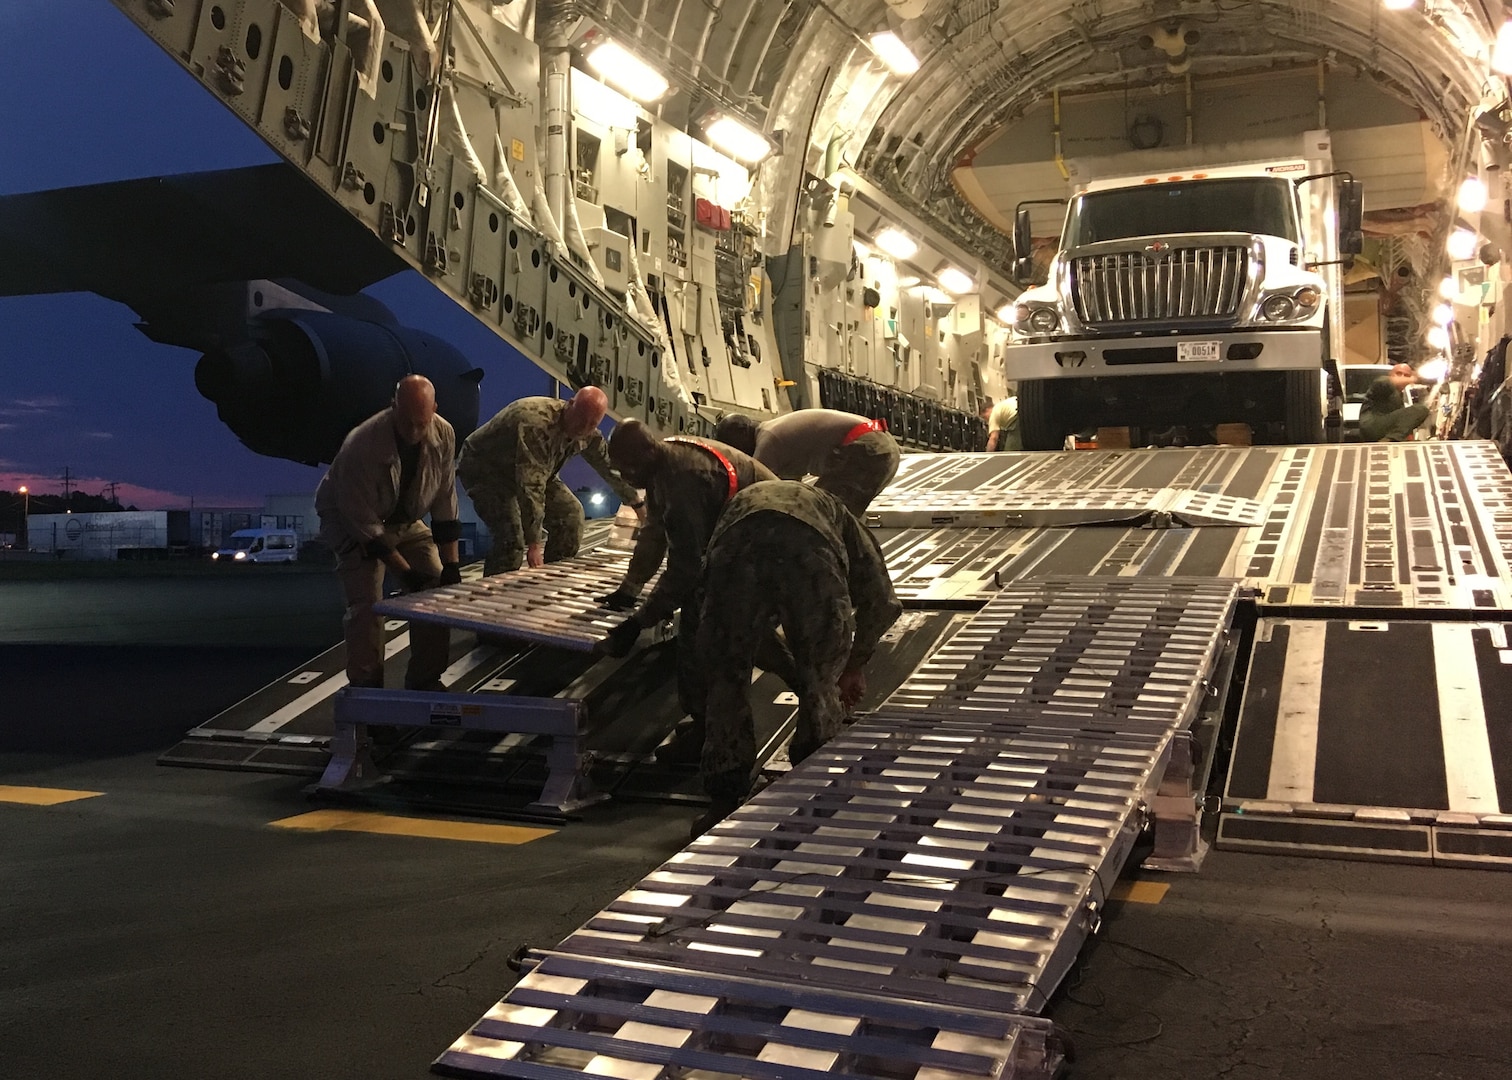 Members of Joint Task Force Civil Support (JTF-CS) lay down ramps in preparation of loading vehicles onto a Boeing C-17 Globemaster III during a no-notice Deployment Readiness Exercise (DRE). The purpose of the DRE was to test both commands ability to rapidly deploy during an incident. When directed, JTF-CS is ready to respond in 24 hours to provide command and control of 5,200 federal military forces located at more than 36 locations throughout the nation acting in support of civil authority response operations to save lives, prevent further injury, and provide critical support to enable community recover. (Official DoD photo by Air Force Lt. Col. Karen Roganov/released)